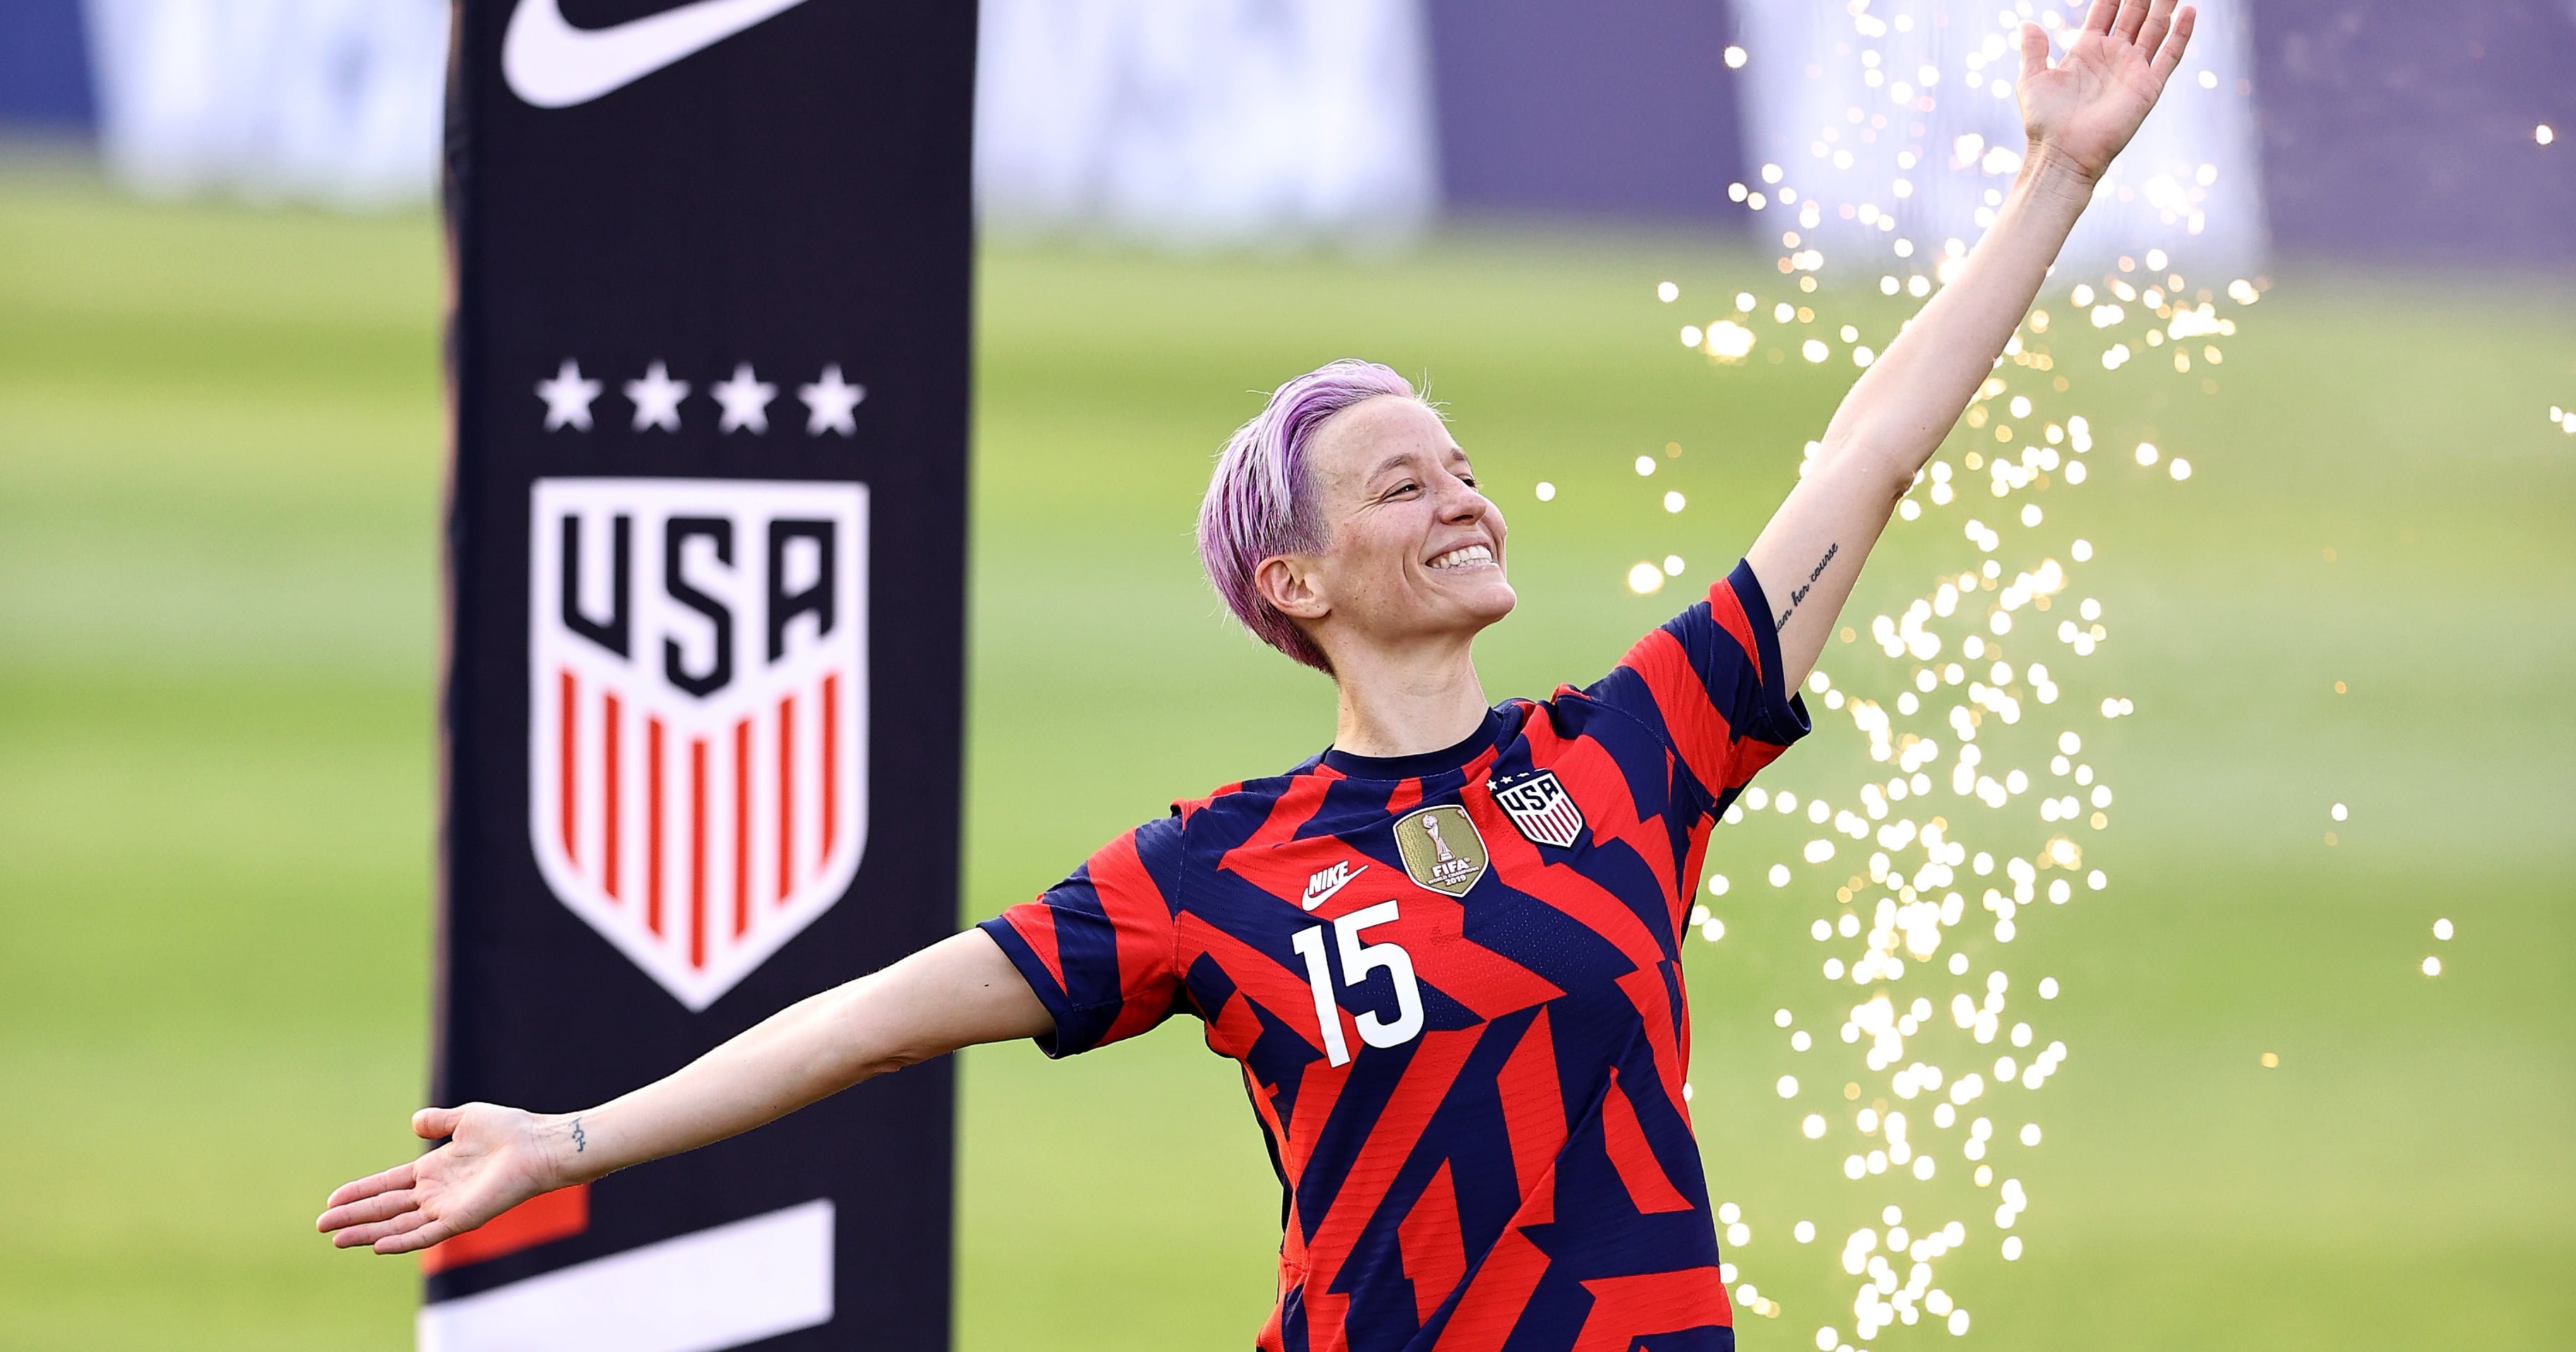 Legend Megan Rapinoe Is Playing Her Final World Cup. Here’s a Look Back at Her Career